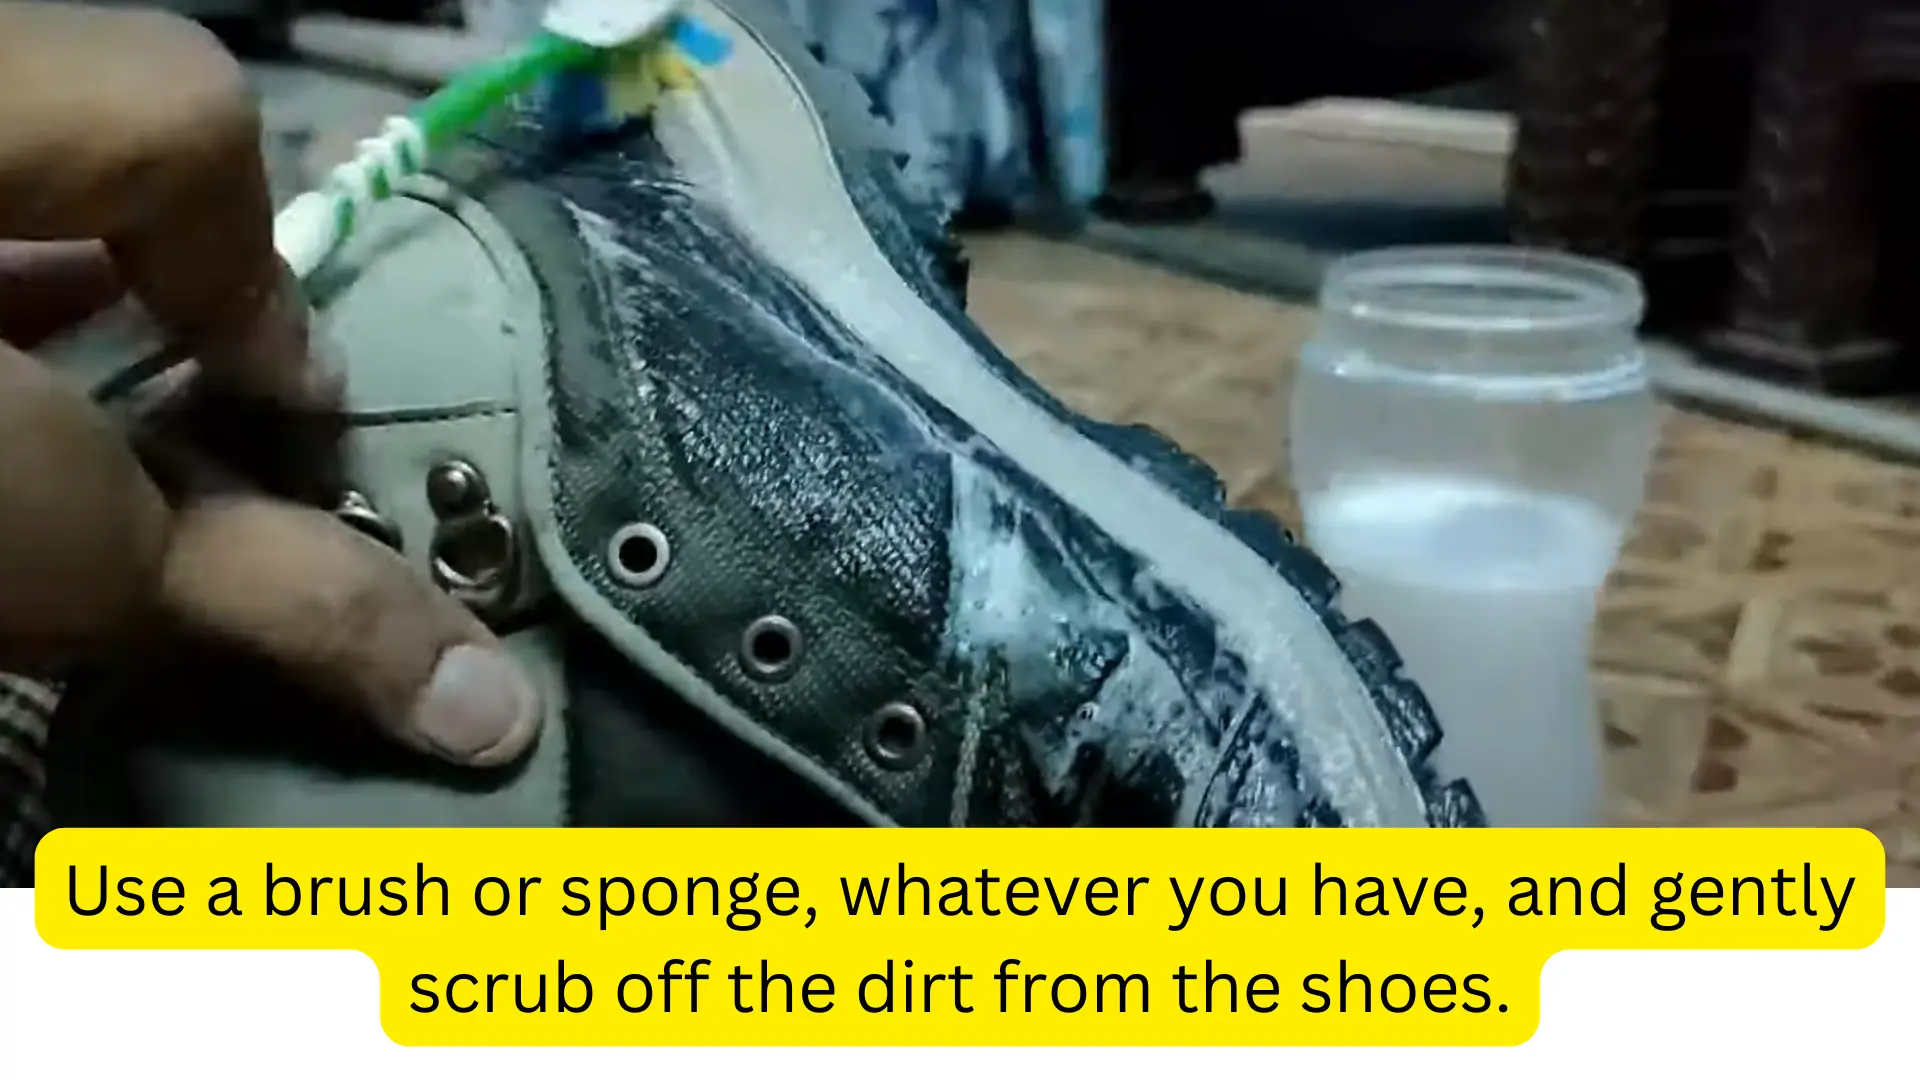 Use a brush or sponge, whatever you have, and gently scrub off the dirt from the shoes.